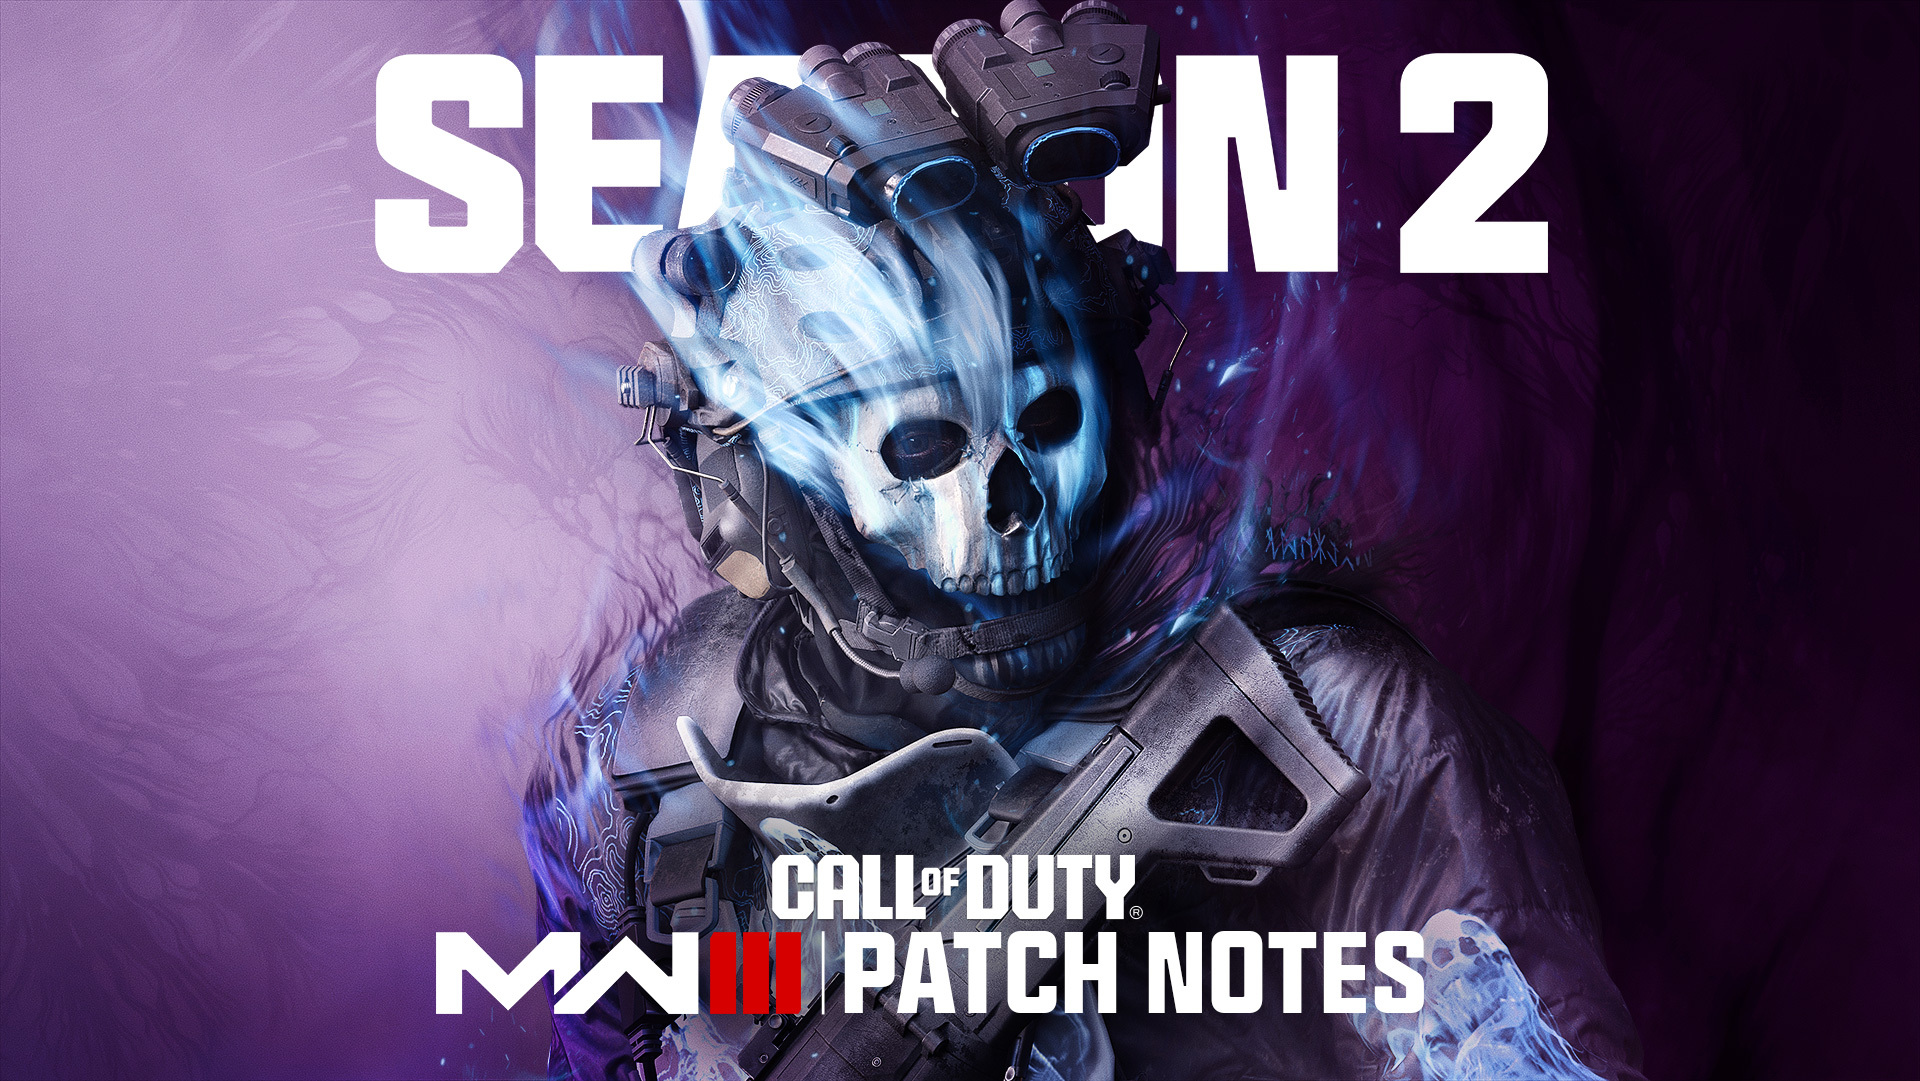 Call of Duty: MWIII Season 2 Patch Notes - New Weapons, Maps & Gameplay Updates